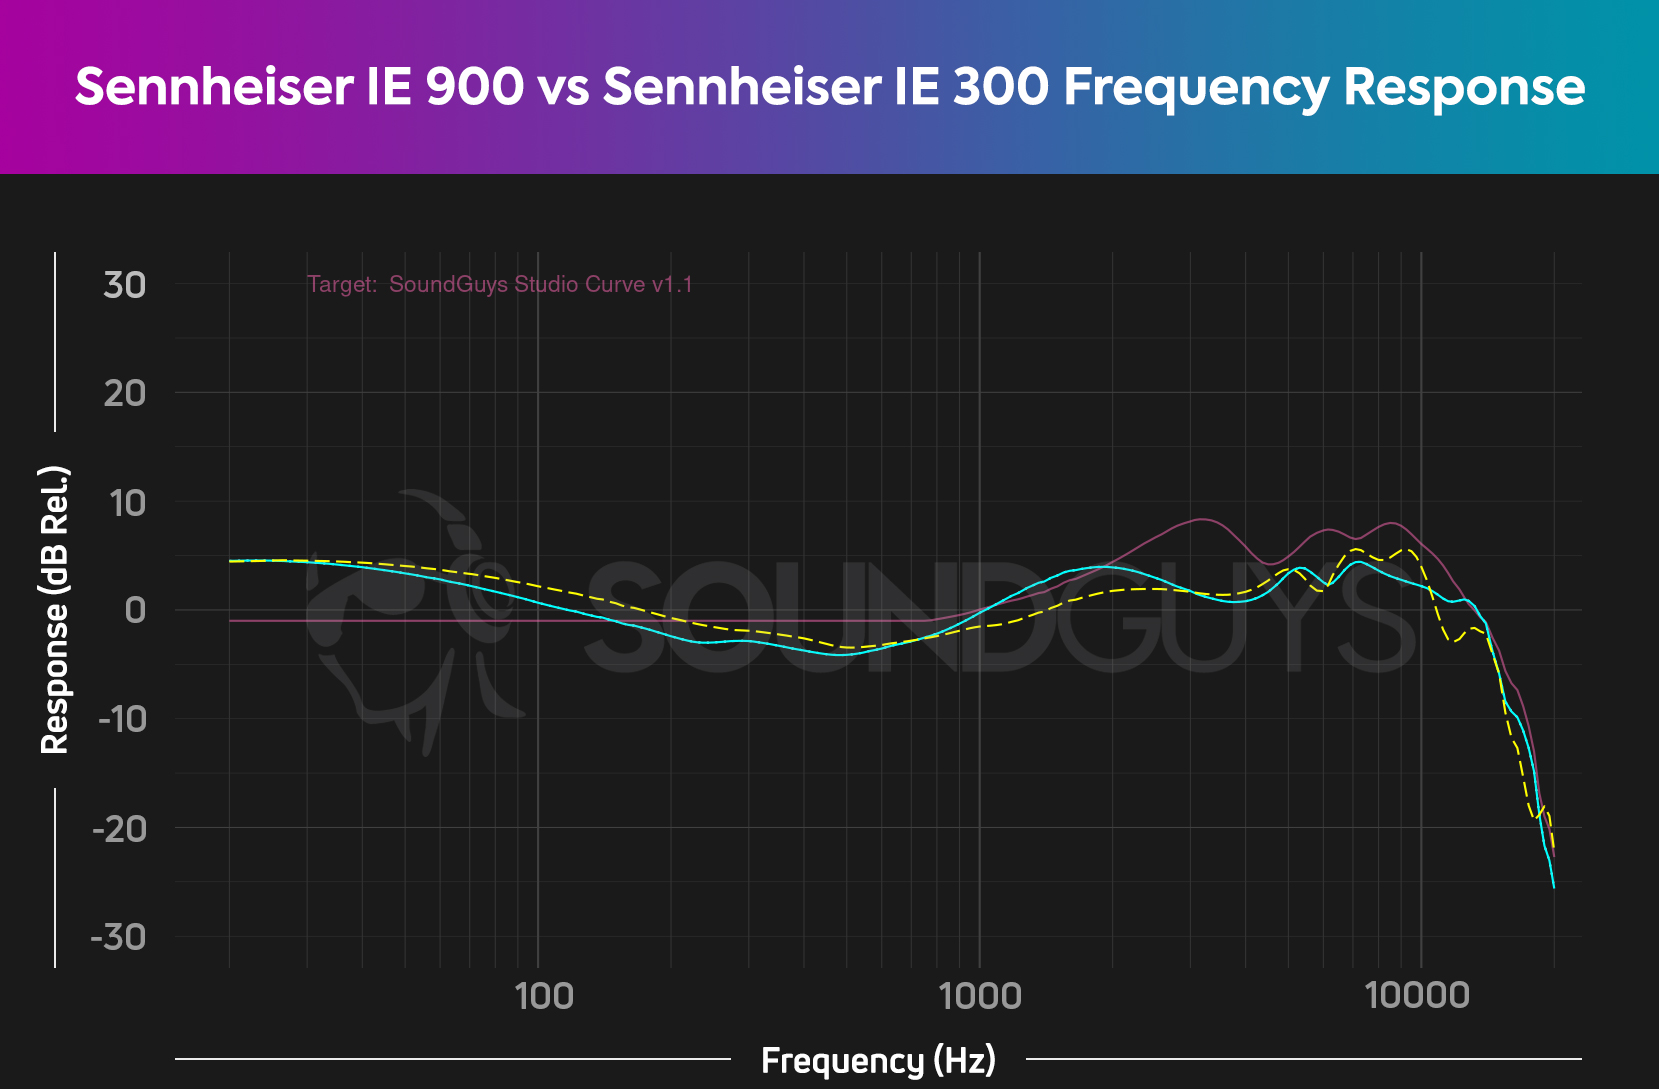 The image shows the Sennheiser IE 300 frequency response as compared to the Sennheiser IE 900, as compared to the SoundGuys studio frequency response ideal. They are fairly similar.